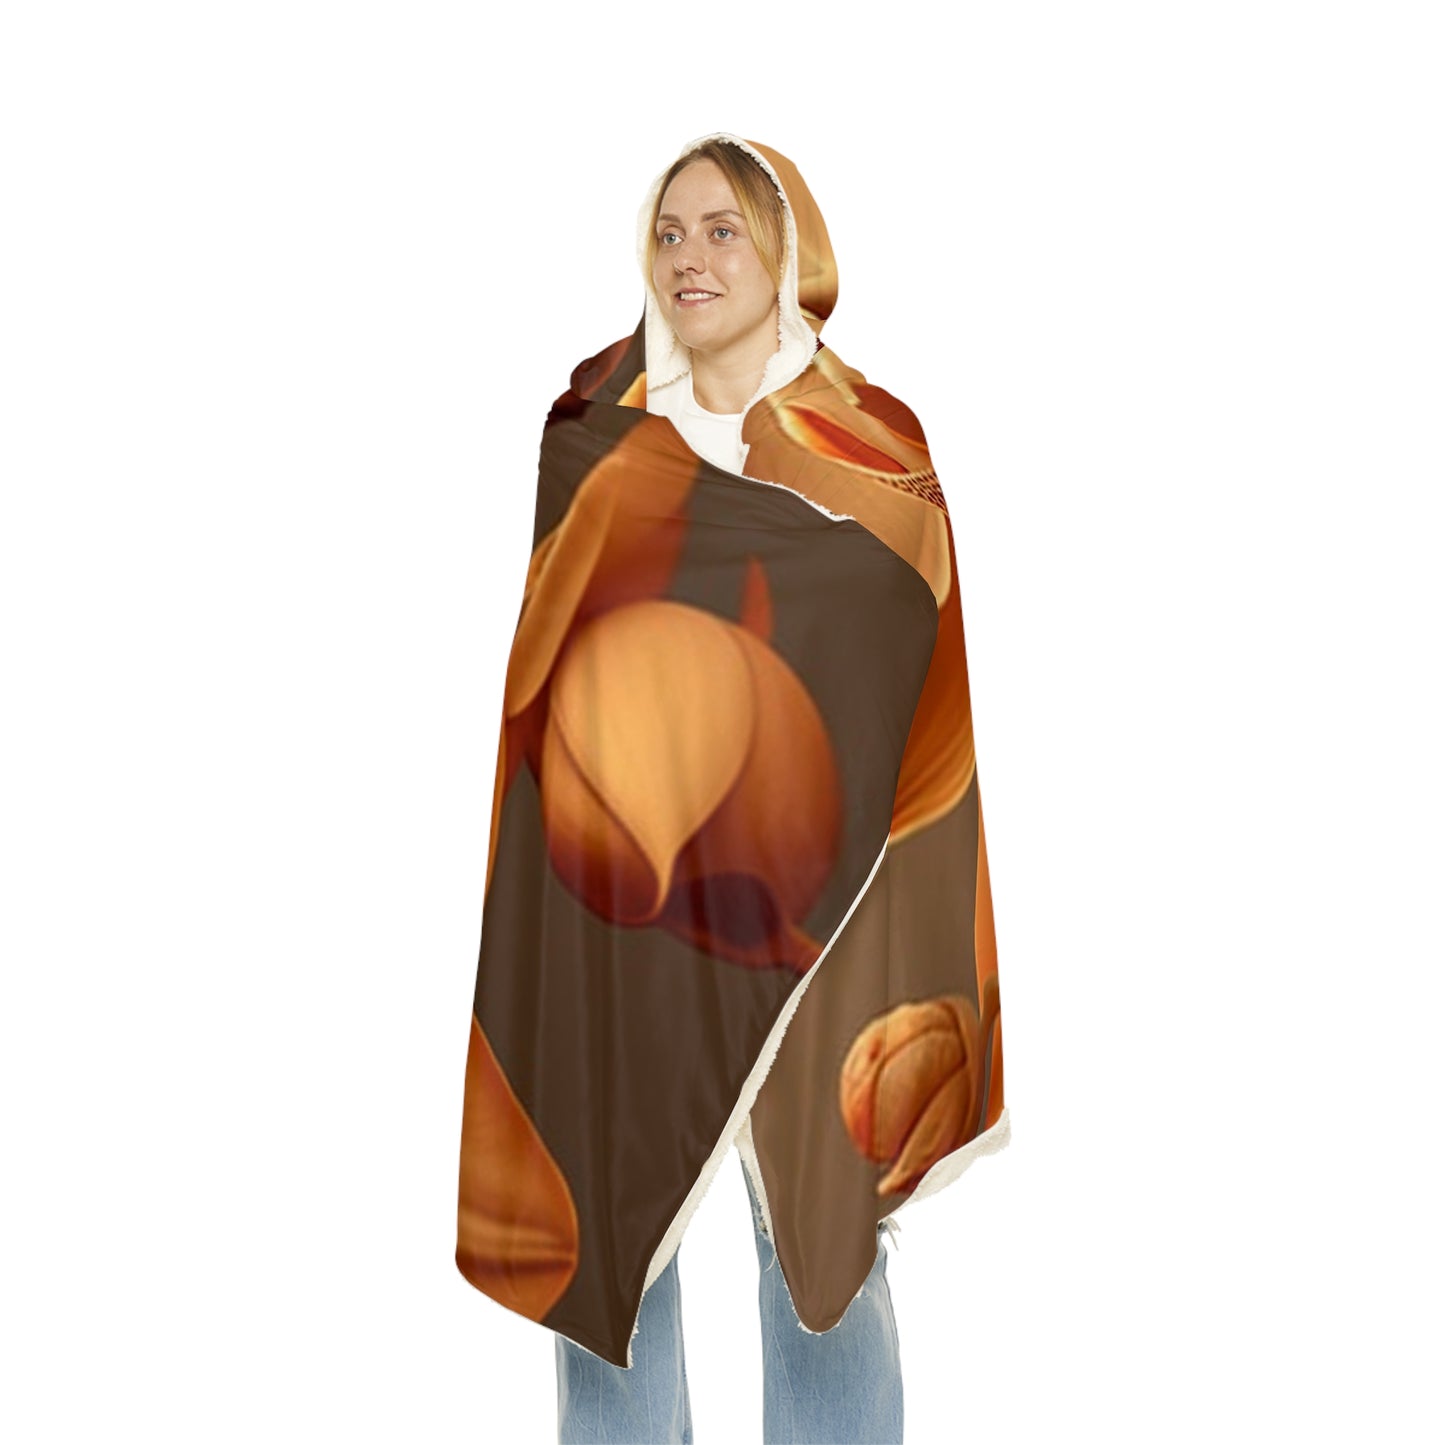 Snuggle Hooded Blanket orchid pedals 4